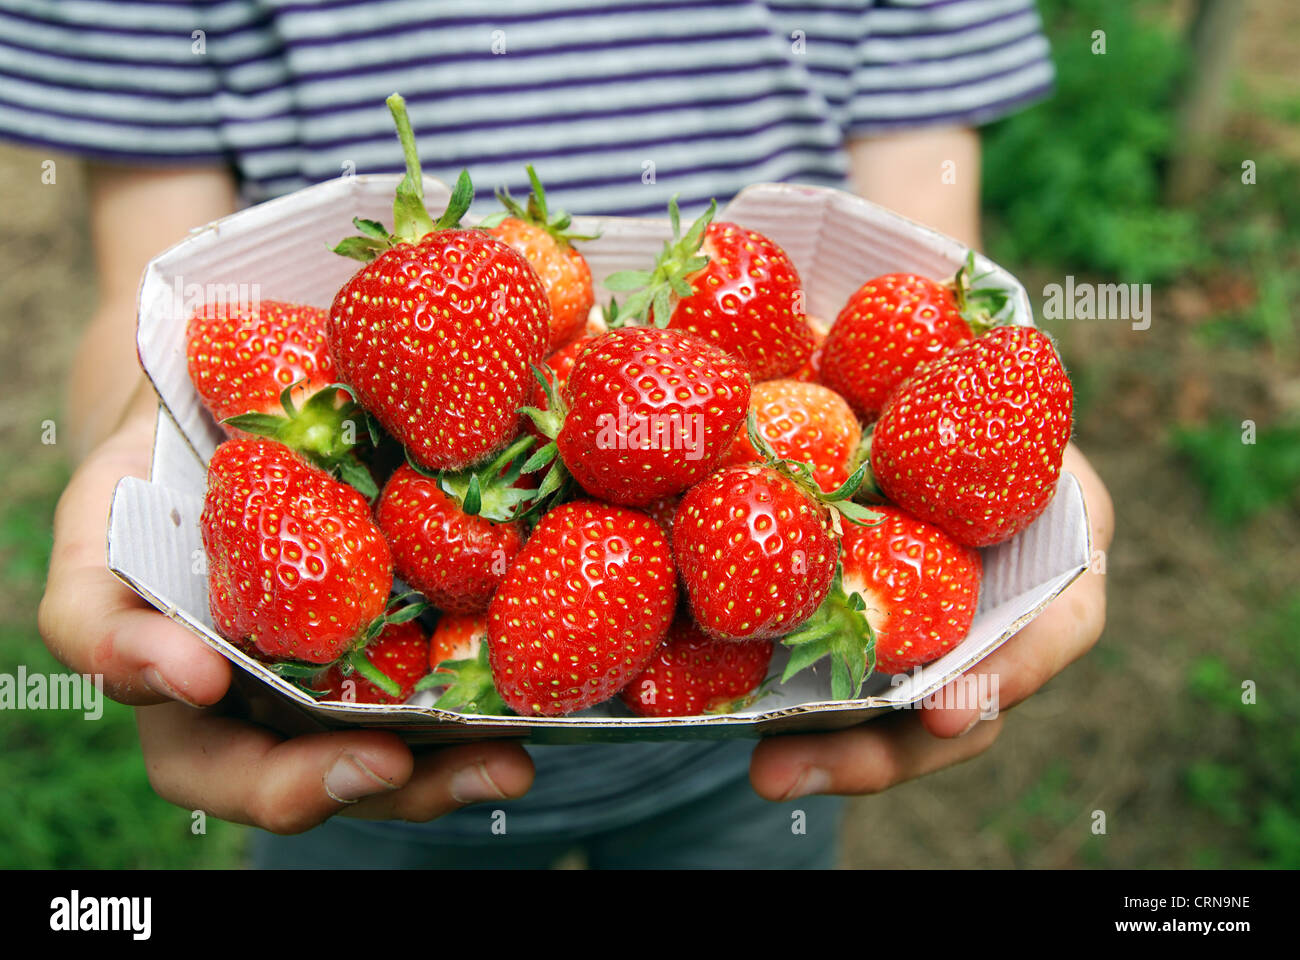 fresh picked strawberries from a ' pick your own ' fruit farm in cheshire, uk Stock Photo